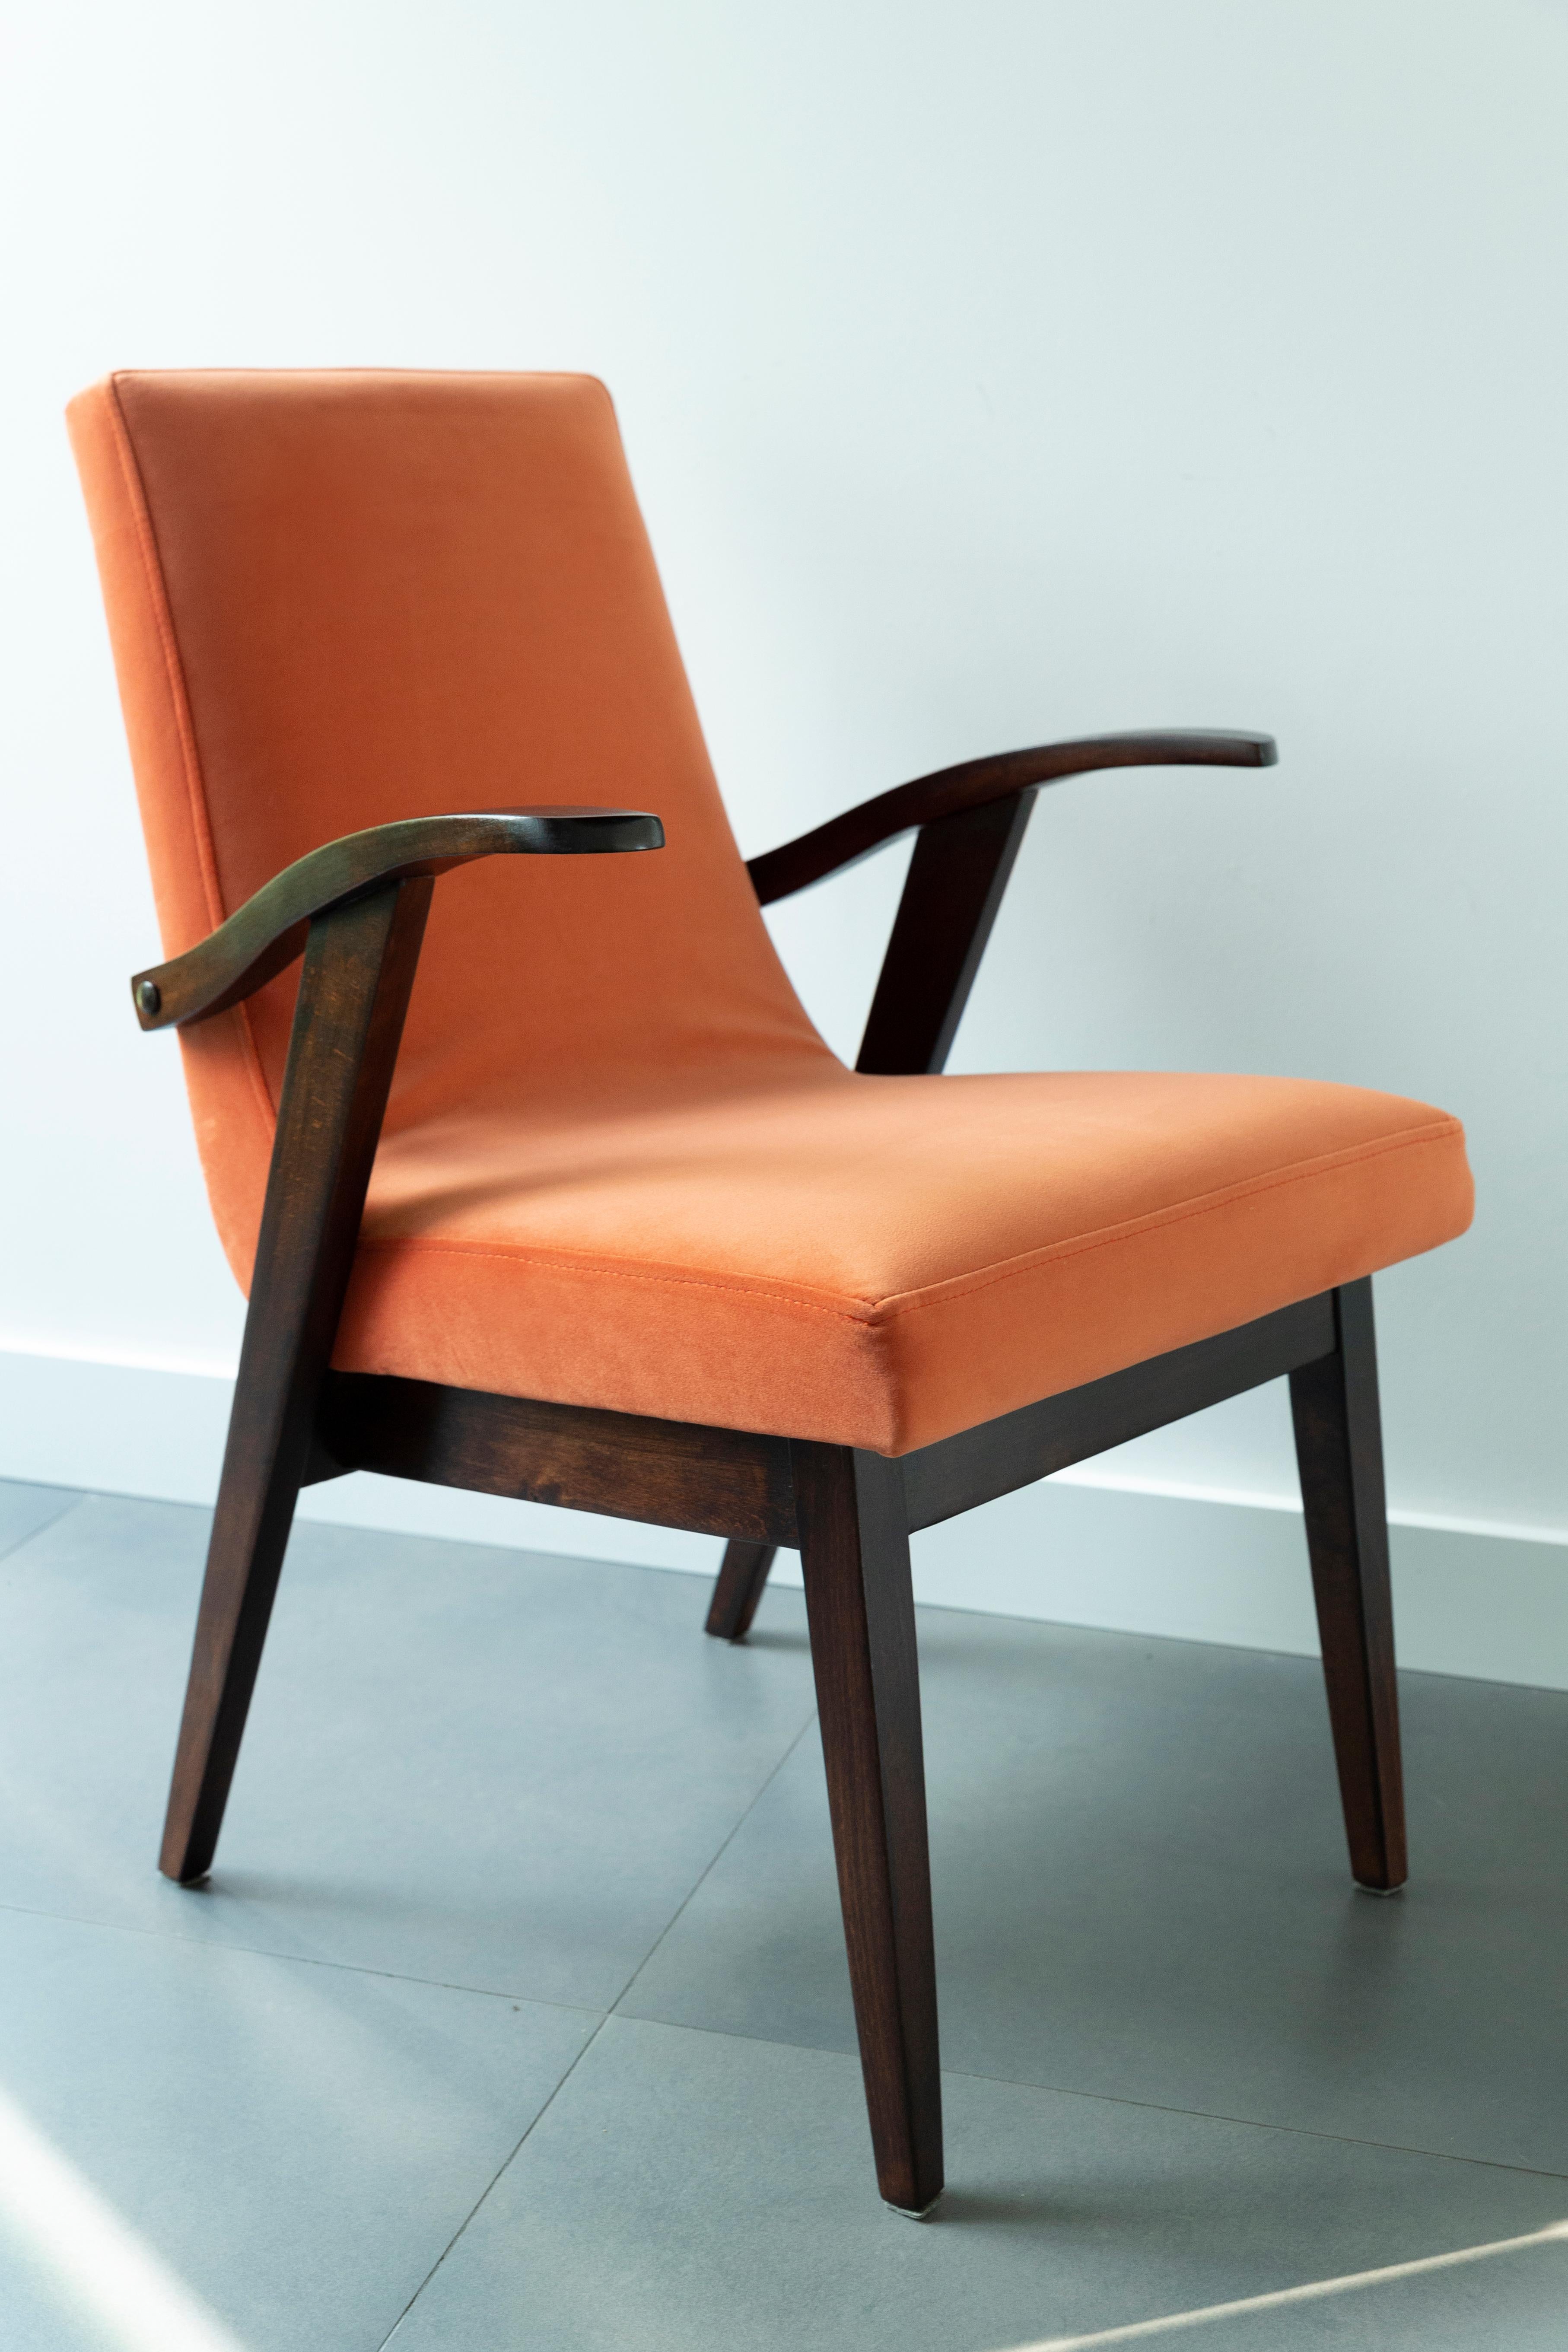 Polish Set of Eight Vintage Chairs in Orange Velvet by Mieczyslaw Puchala, 1960s For Sale